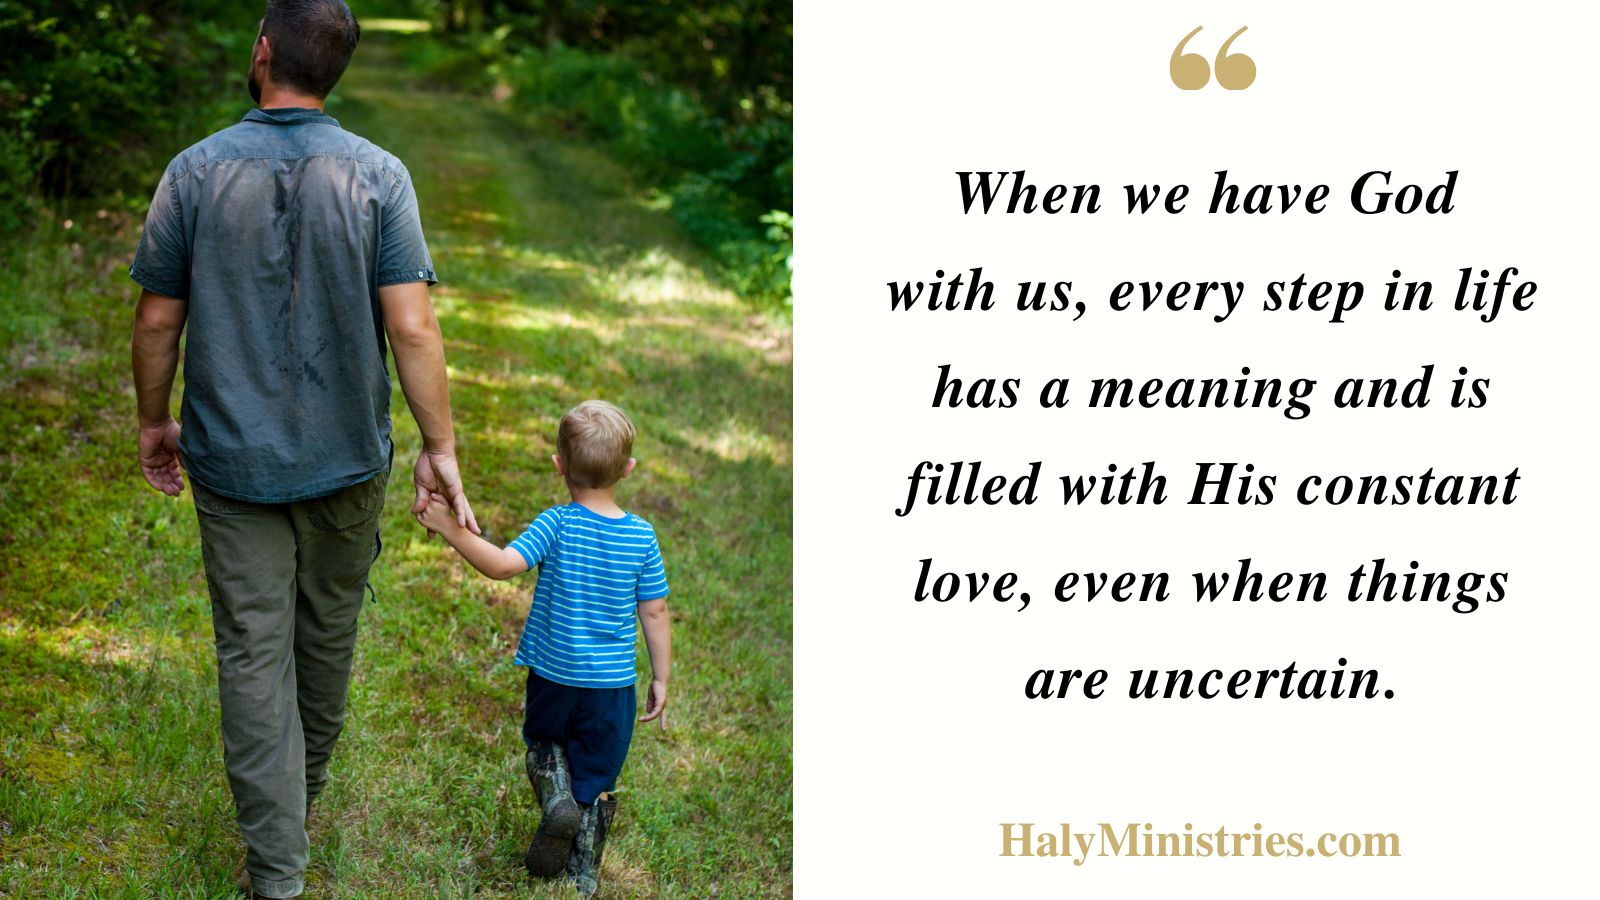 When we have God 
with us, every step in life has a meaning - - Haly Ministries Quotes (photo: man holding a boy by hand walking)